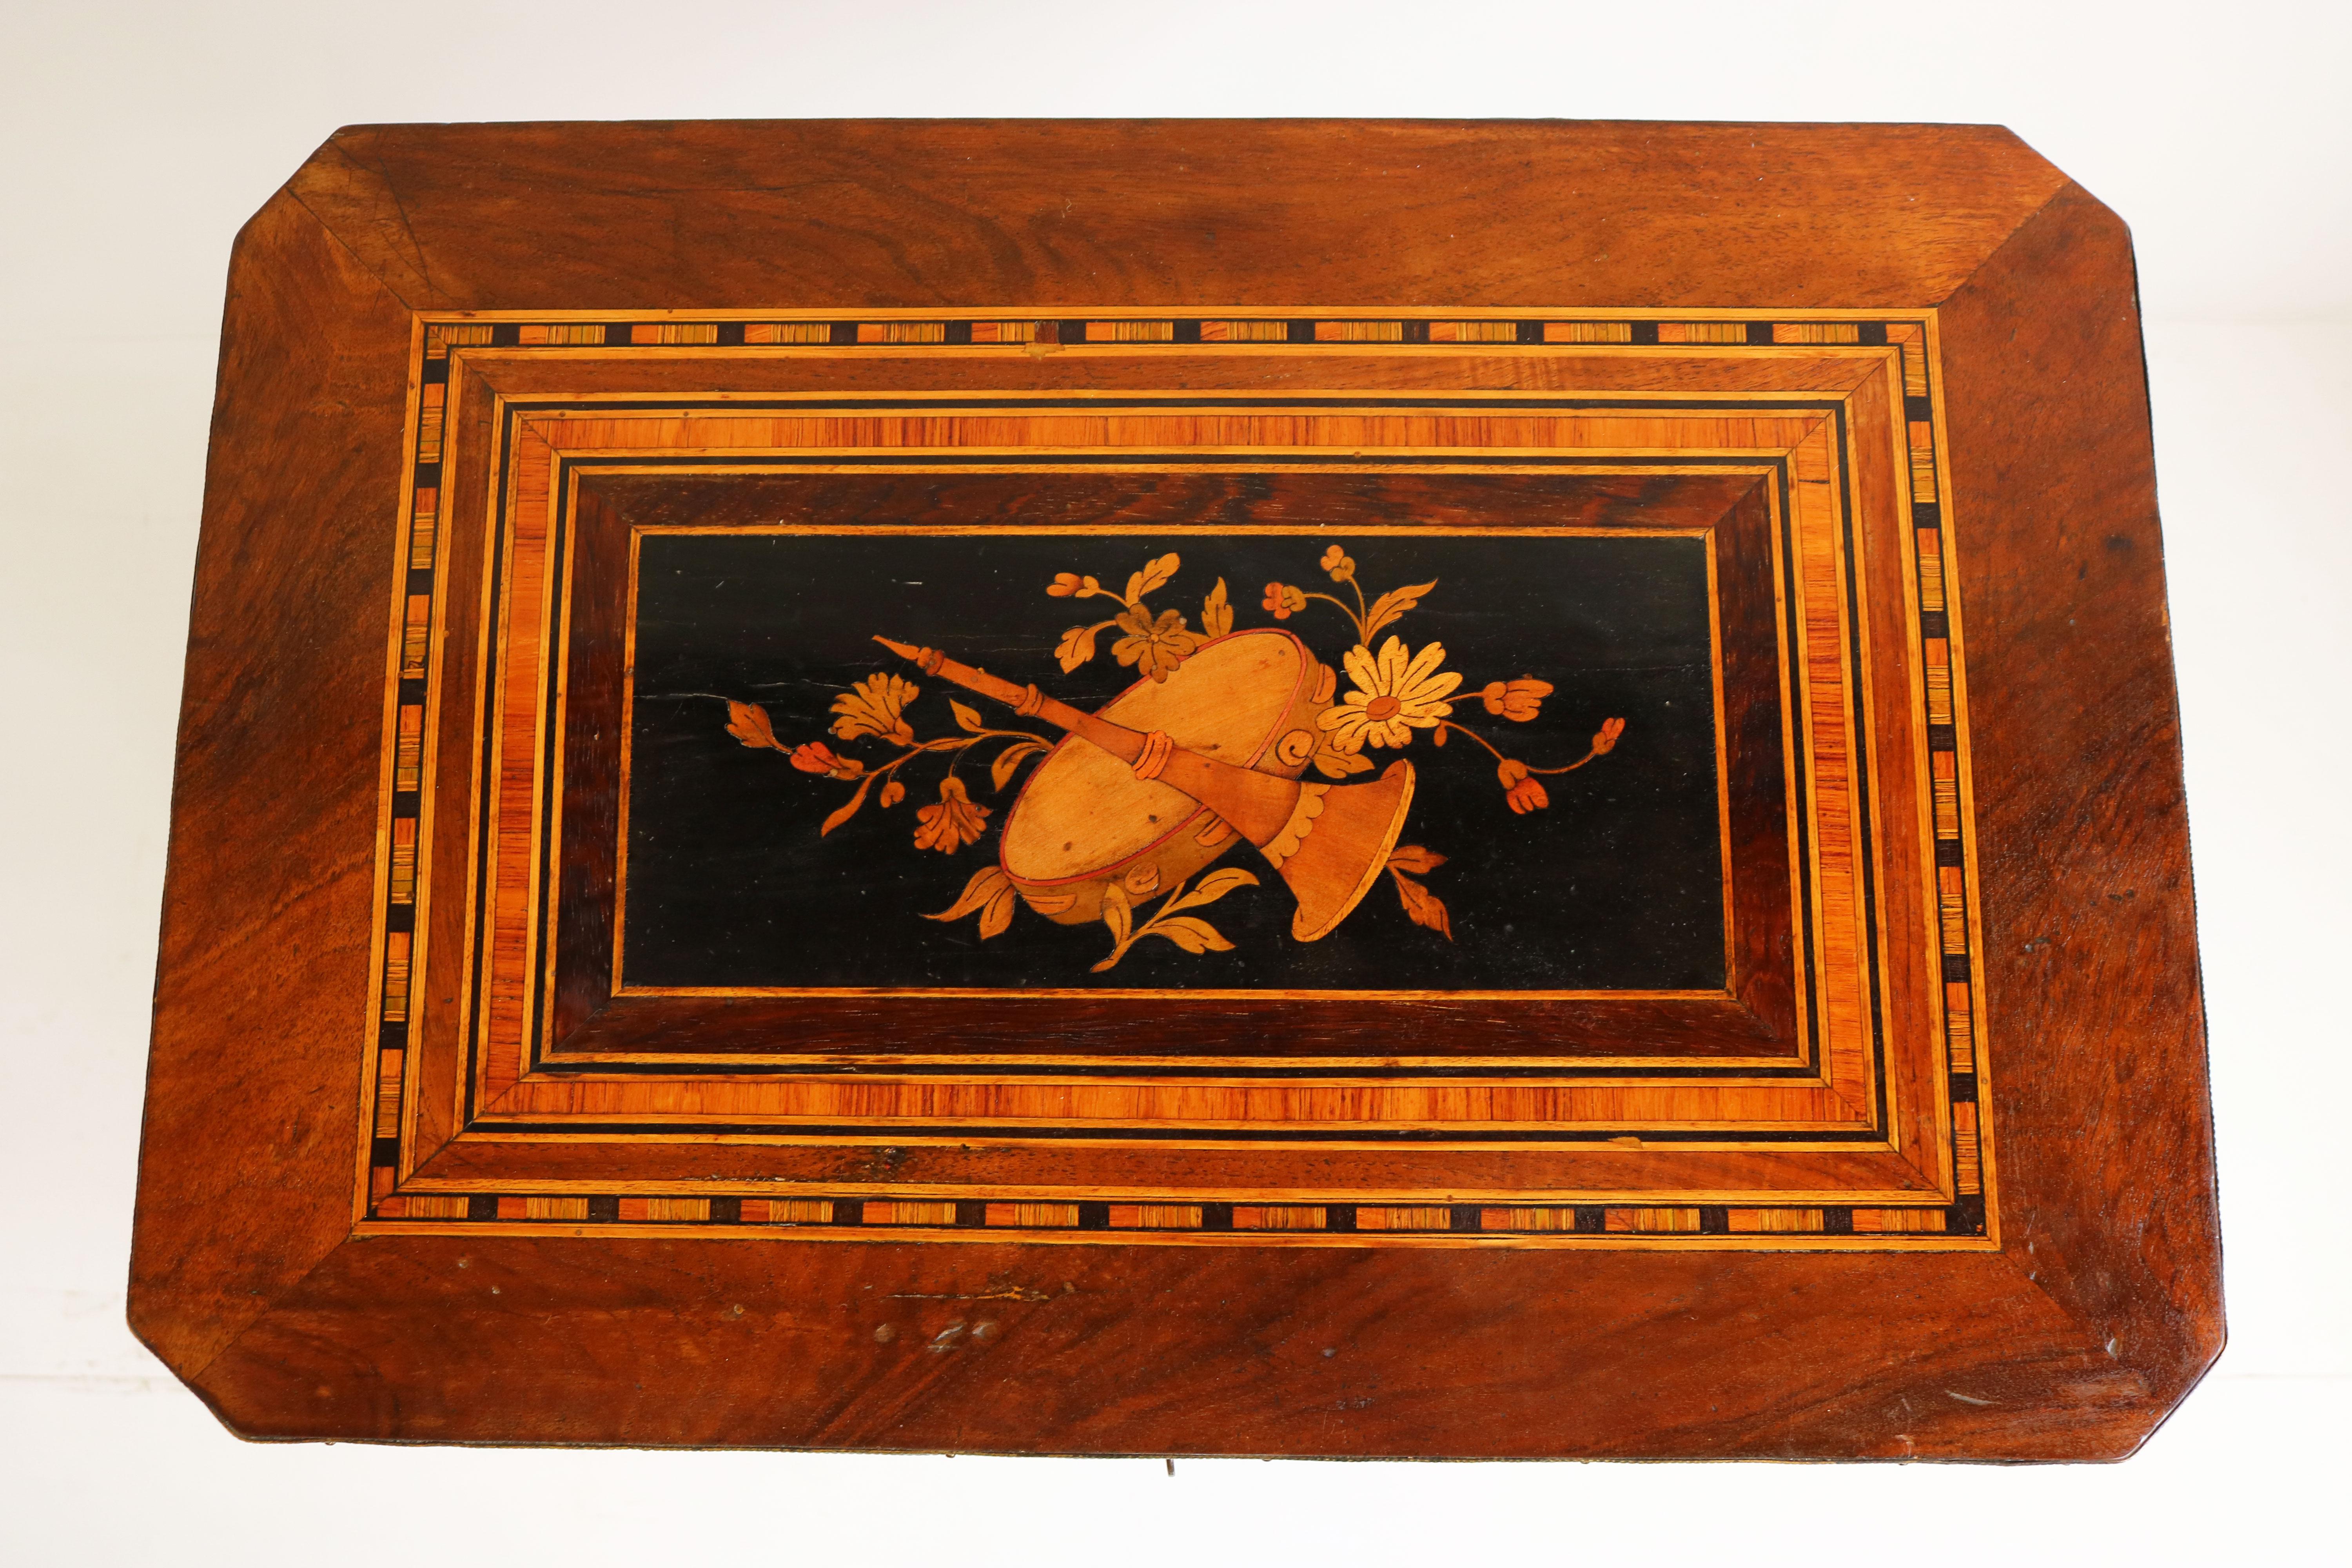 A very nice Napoleon III side table inlaid with marquetry 1860-1870. Standing on curved and blackened legs with connecting platform. 
The beautiful instrumental inlaid top and floral inlaid shelf at the bottom are masterfully crafted from various